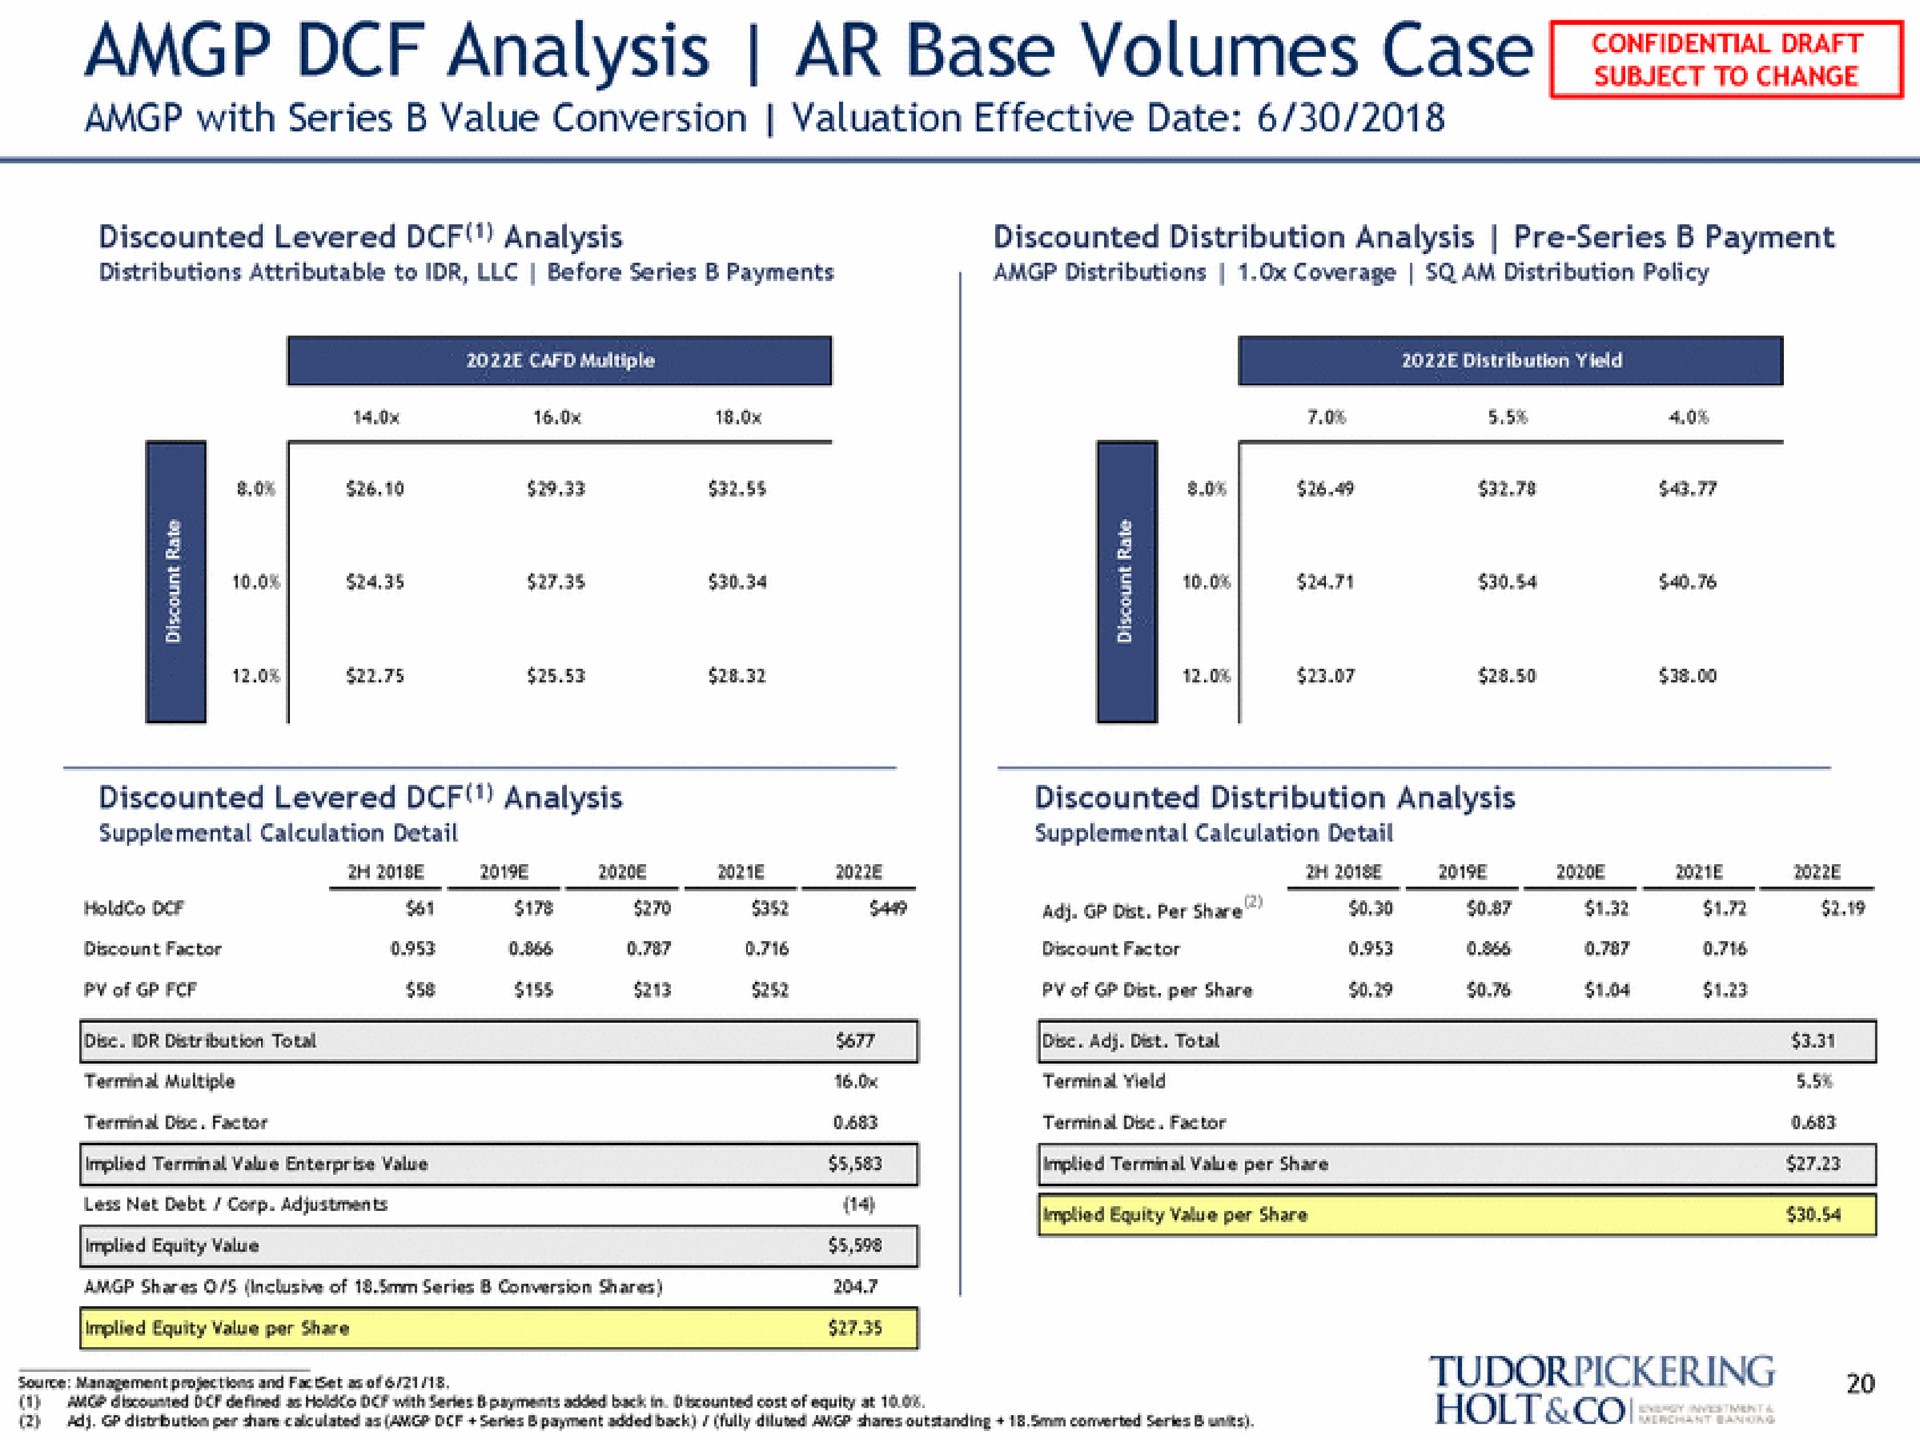 analysis base volumes case to an | Tudor, Pickering, Holt & Co